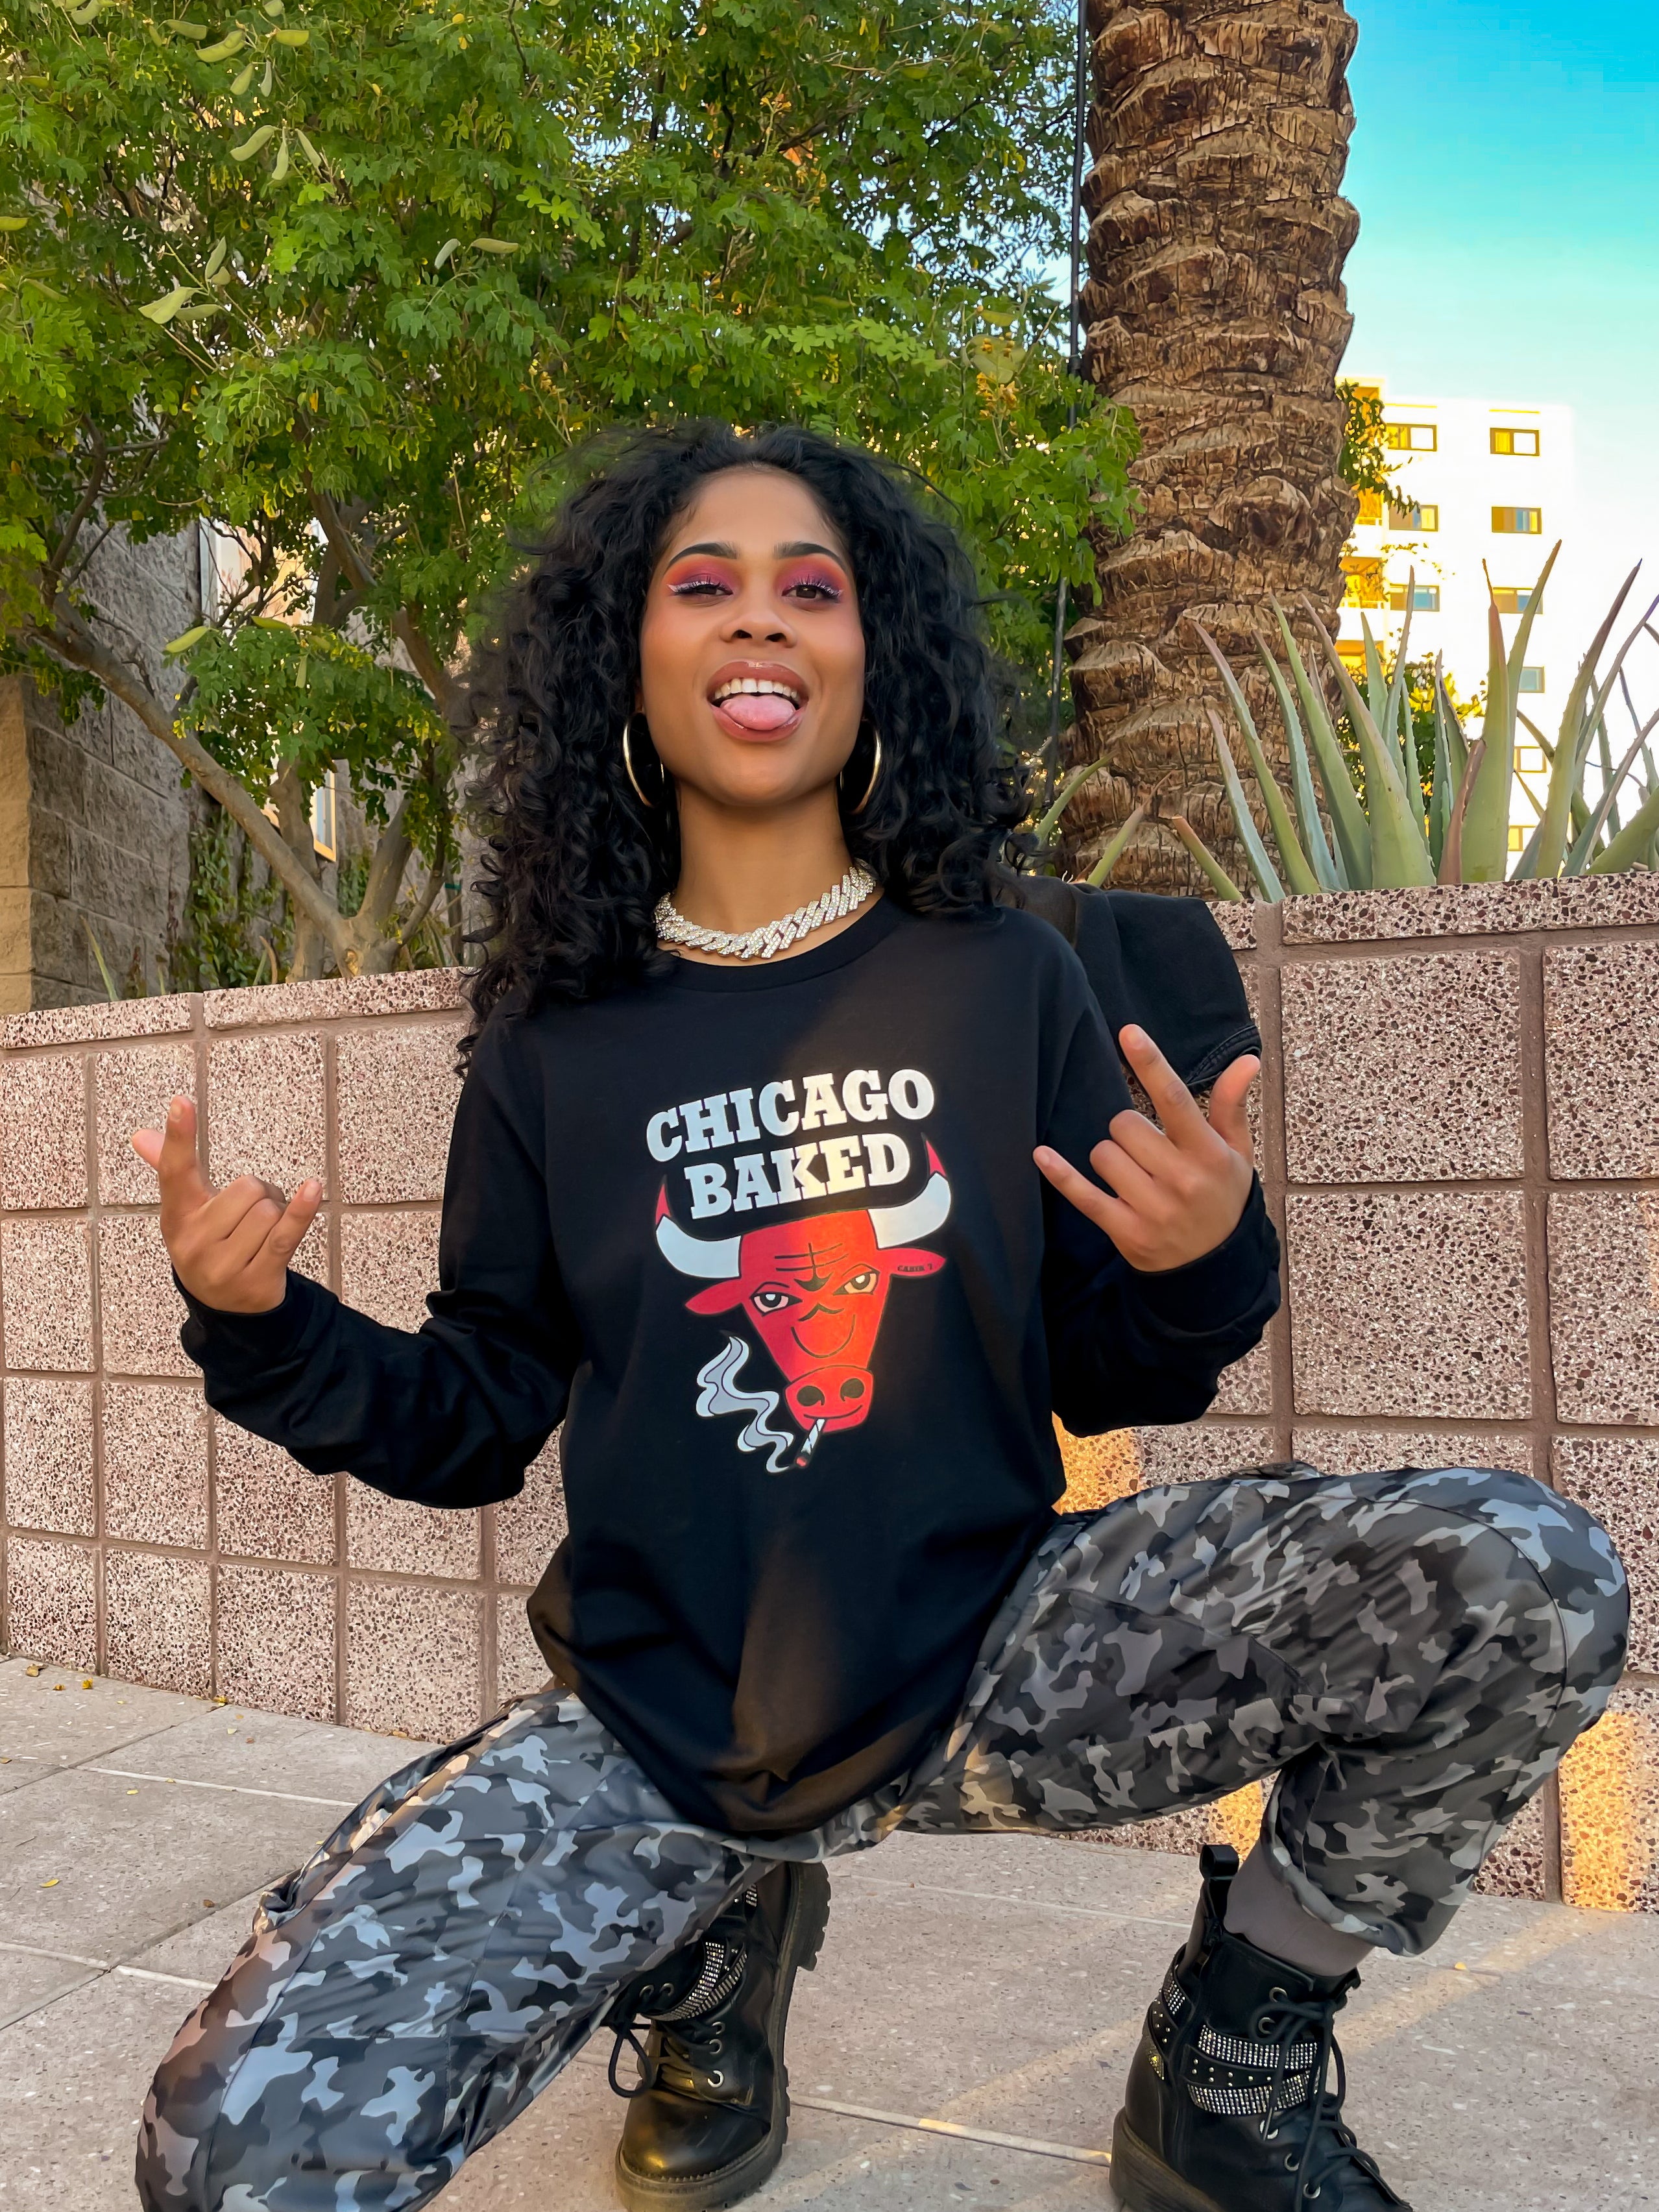 Chicago Baked Long Sleeve